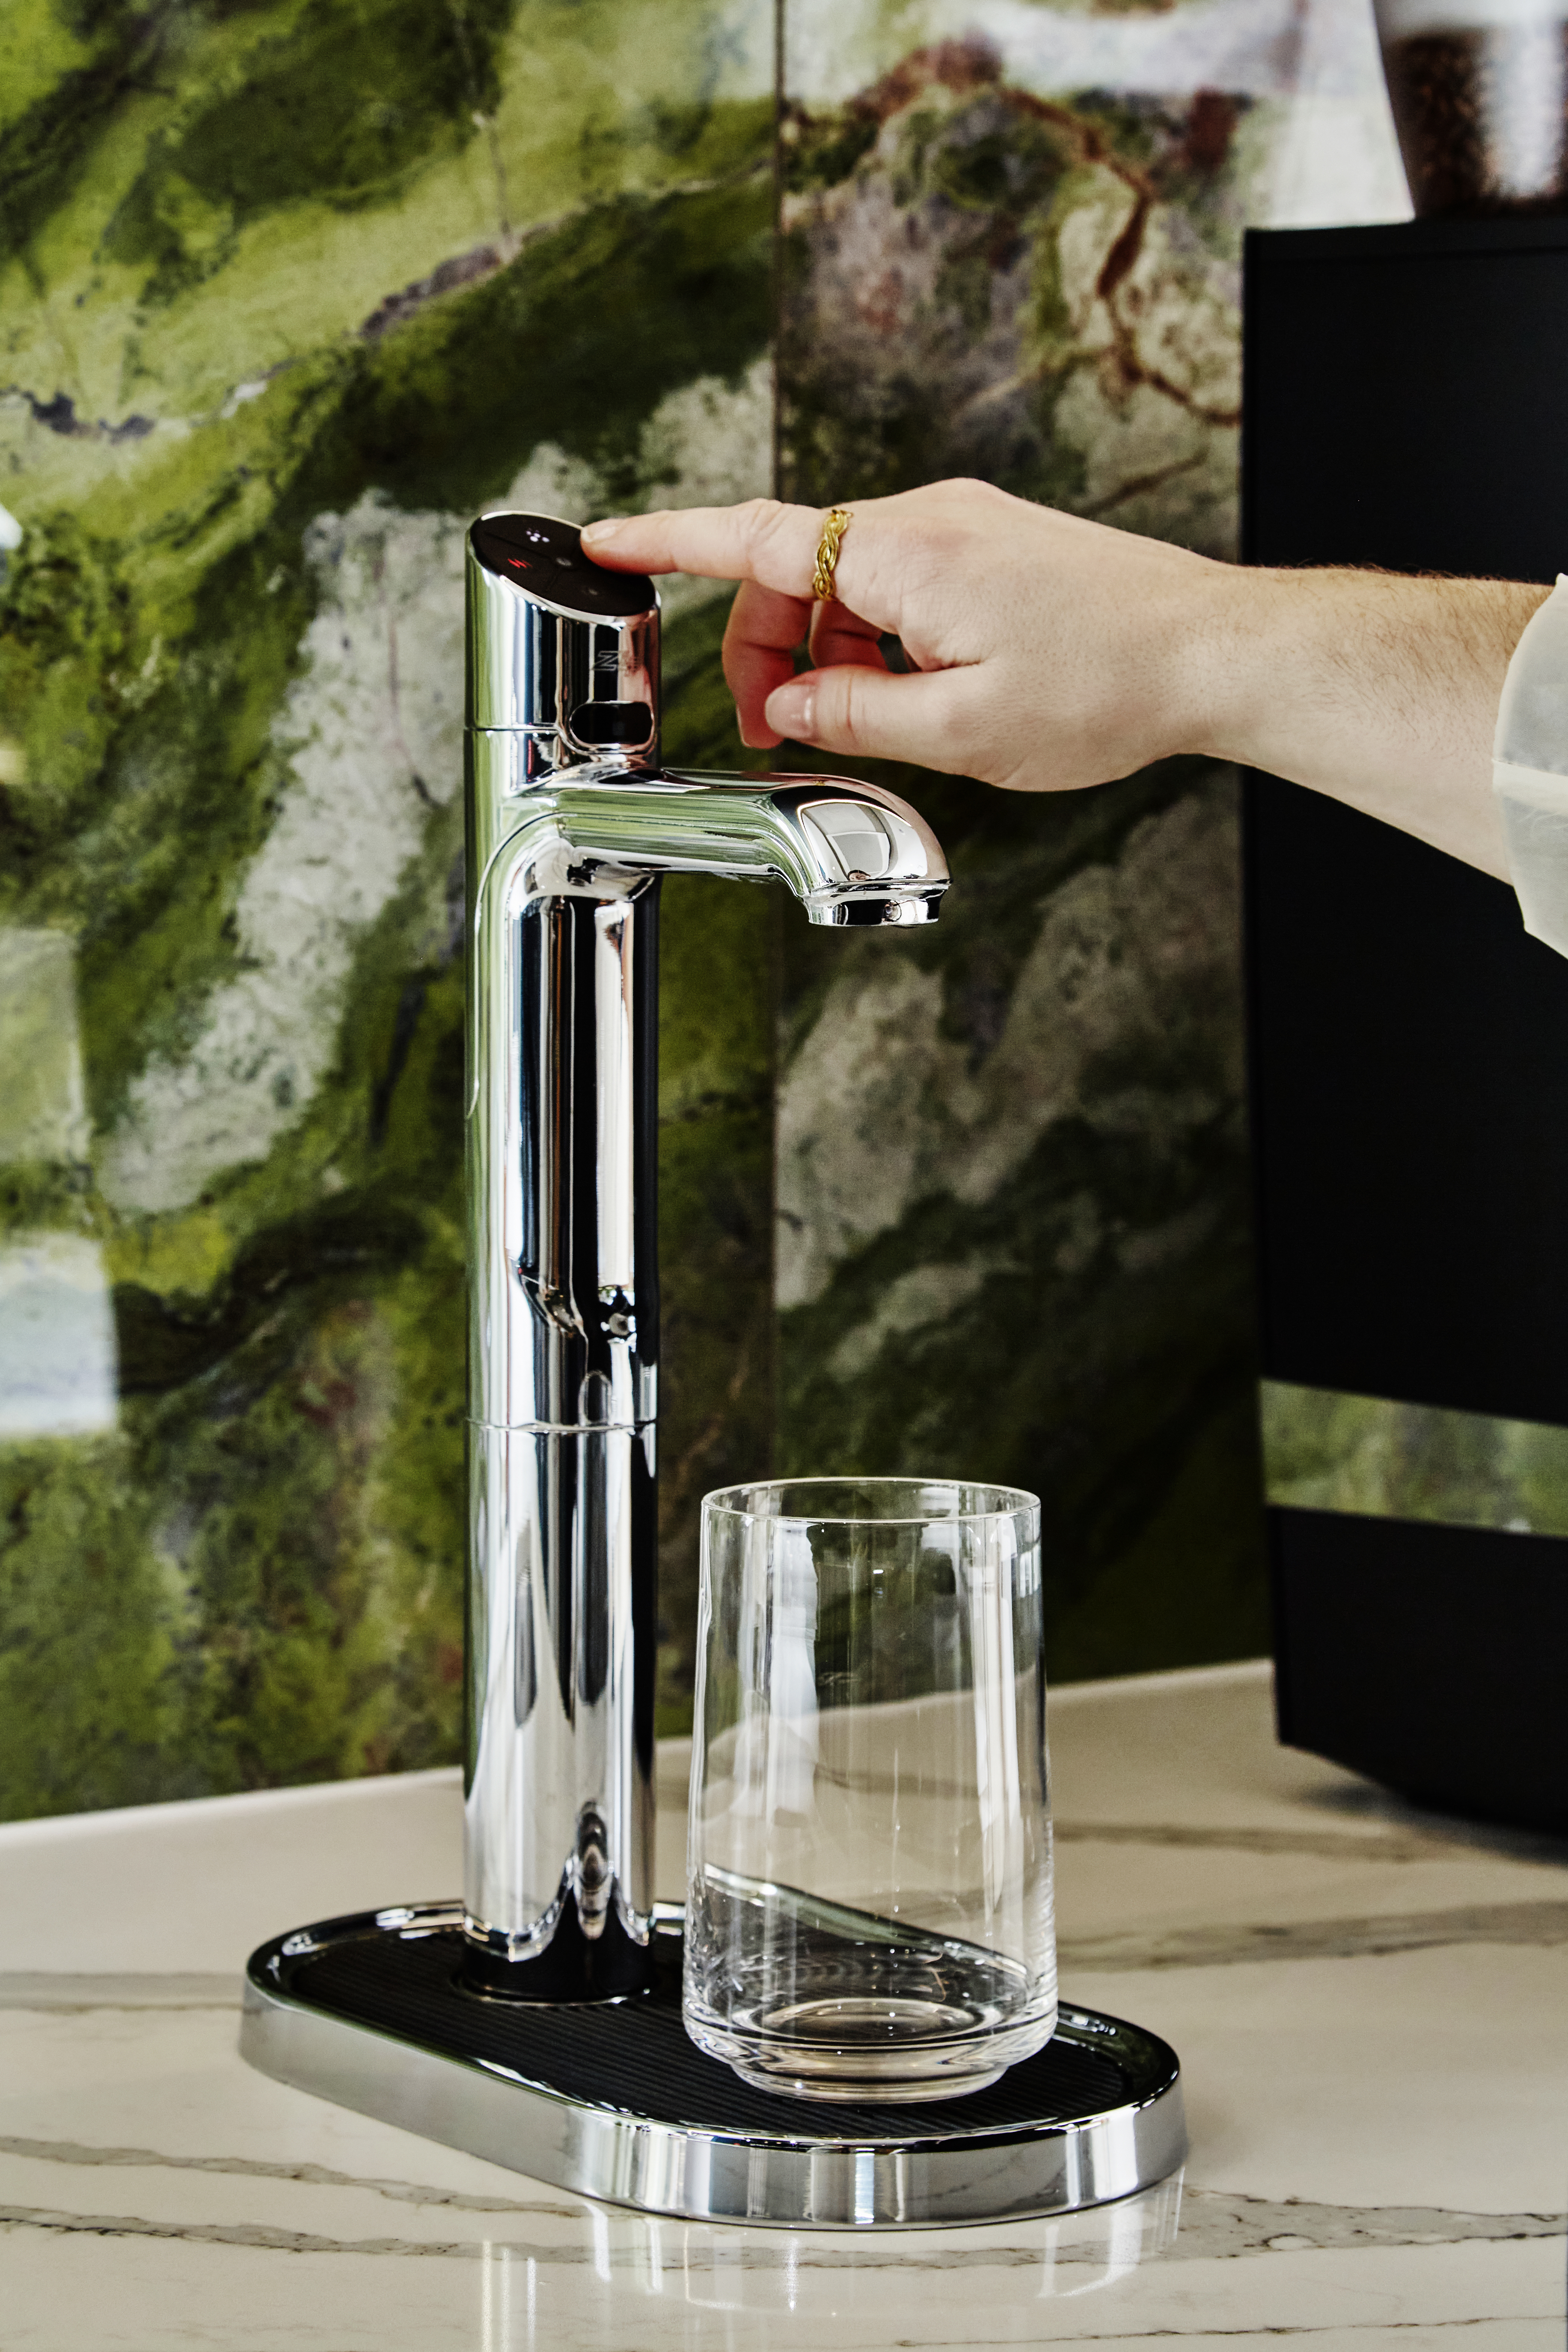 A Zip HydroTap in a smart office space with green design elements in the background.